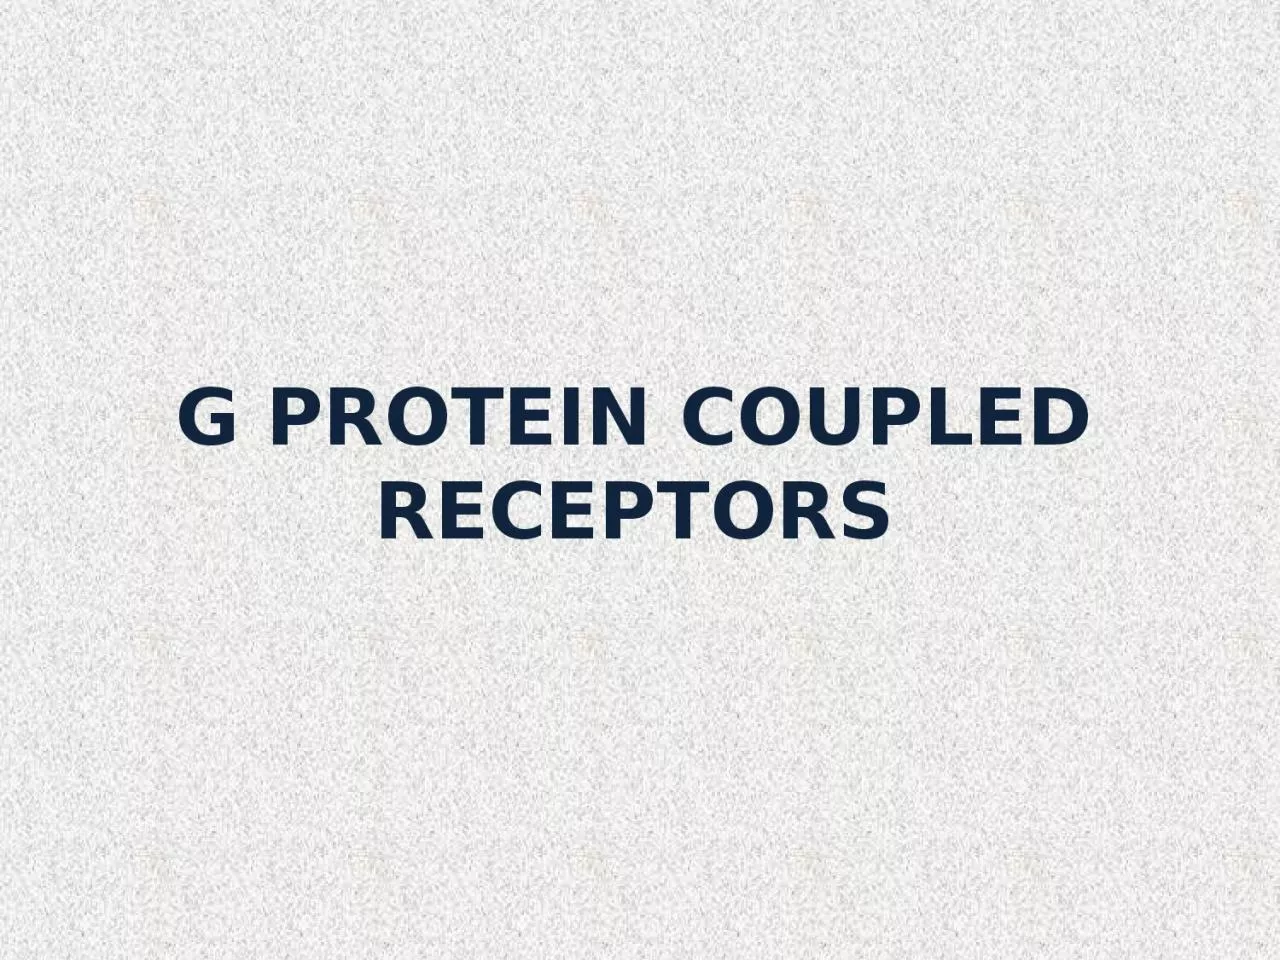 G PROTEIN COUPLED RECEPTORS